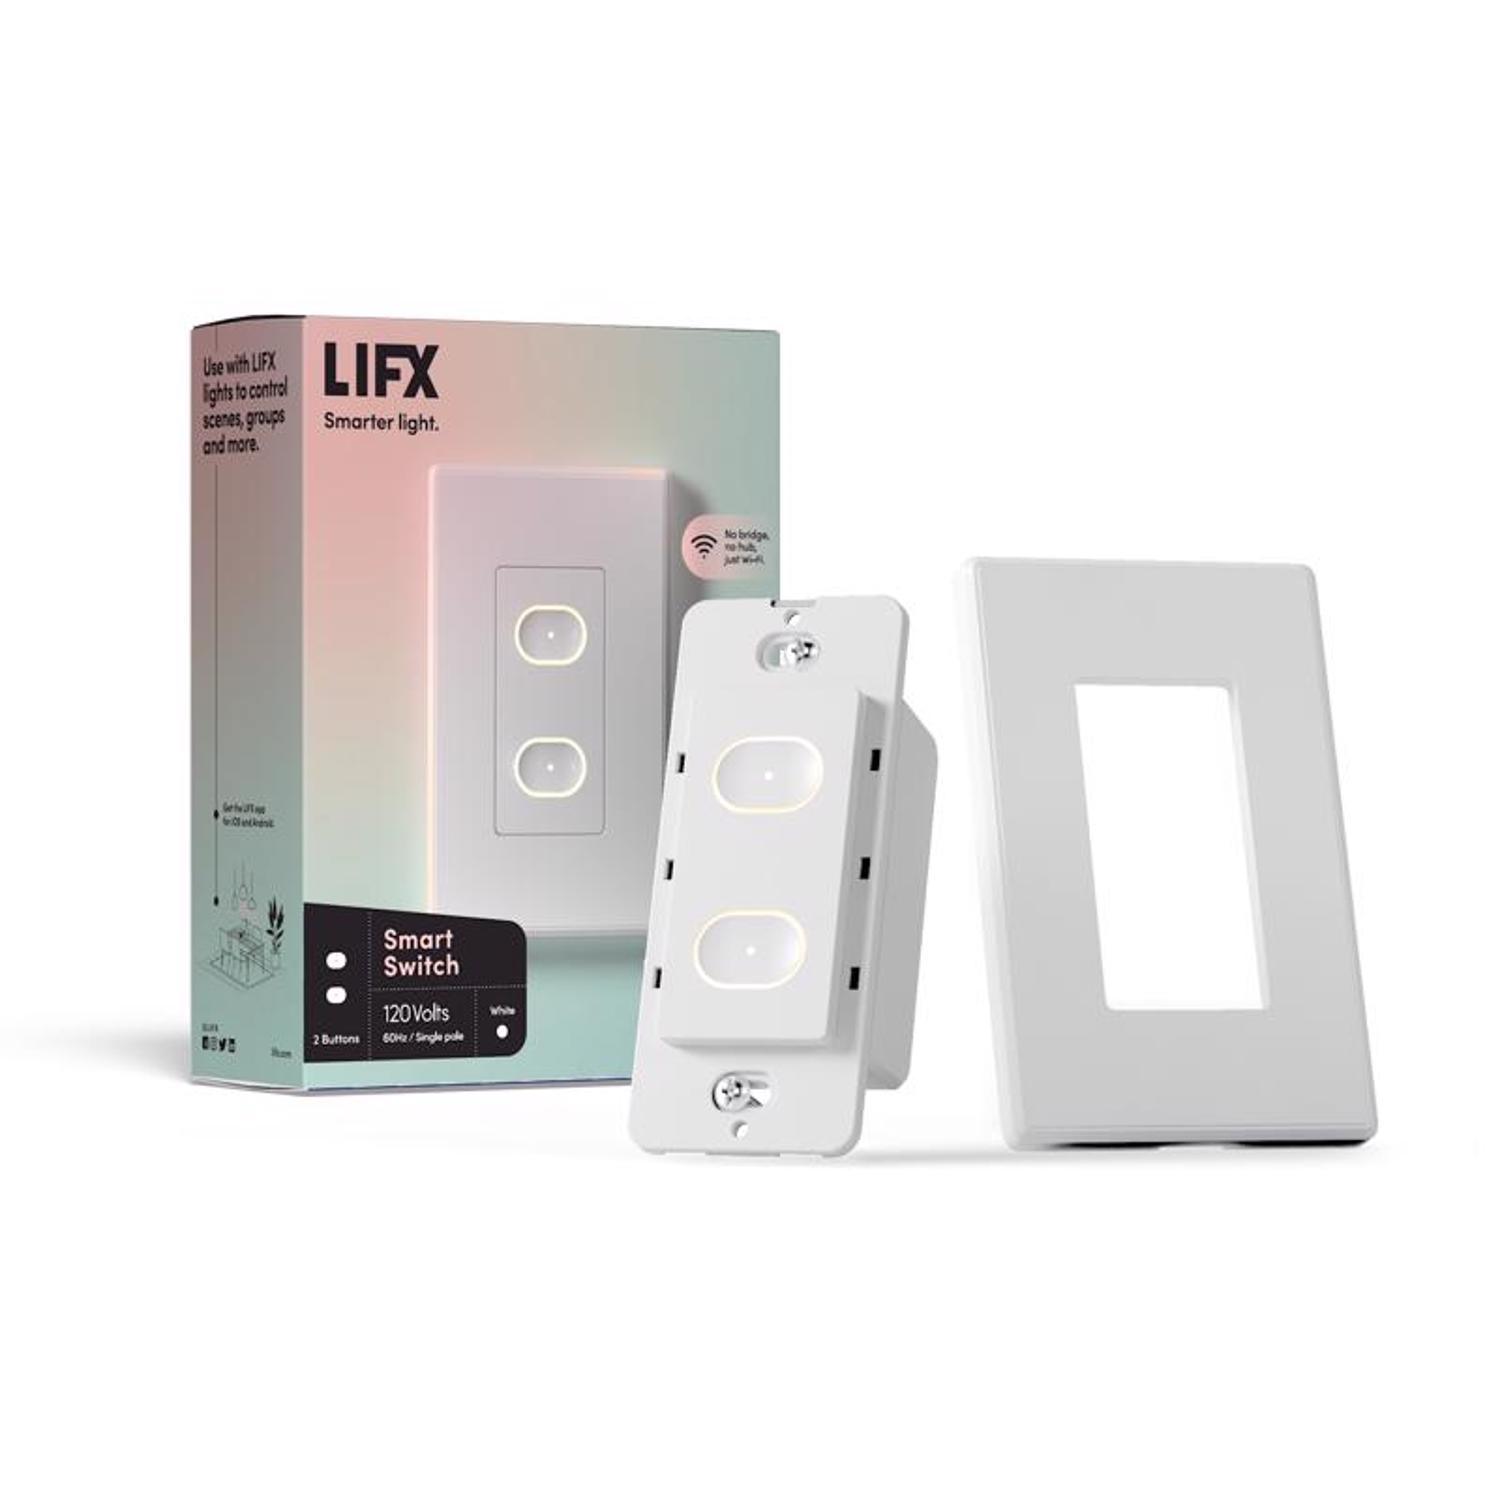 Photos - Household Switch LIFX Smart Home 15 amps Single Pole Smart Smart-Enabled Switch White 1 pk 